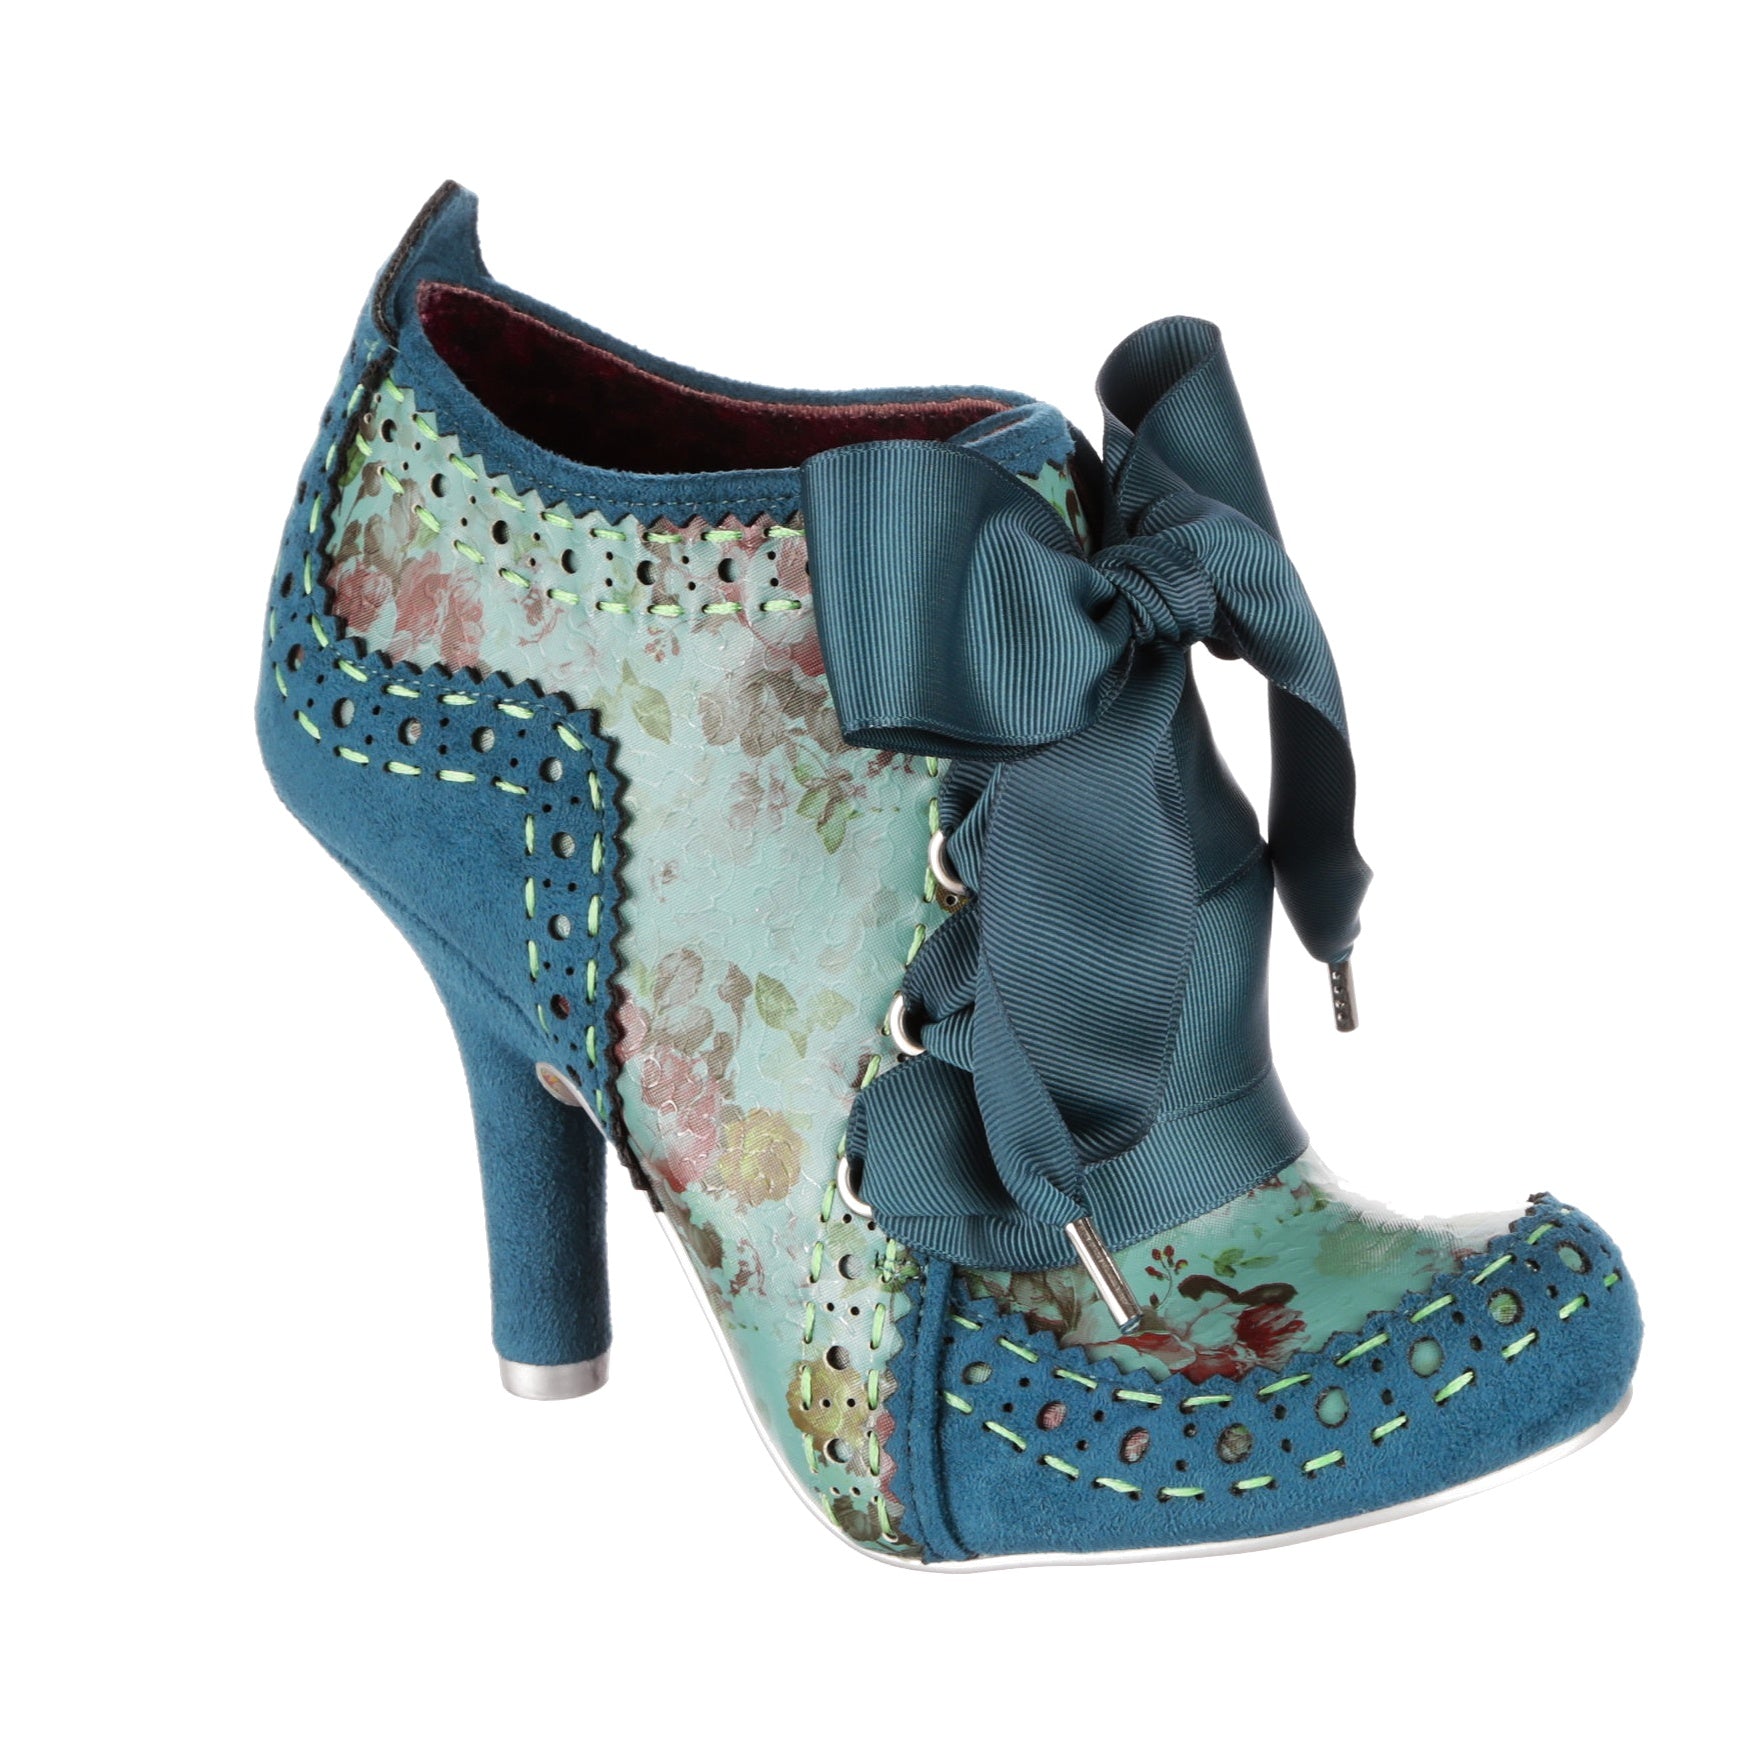 Irregular Choice Abigail's 3rd Party Black / Silver - Free delivery